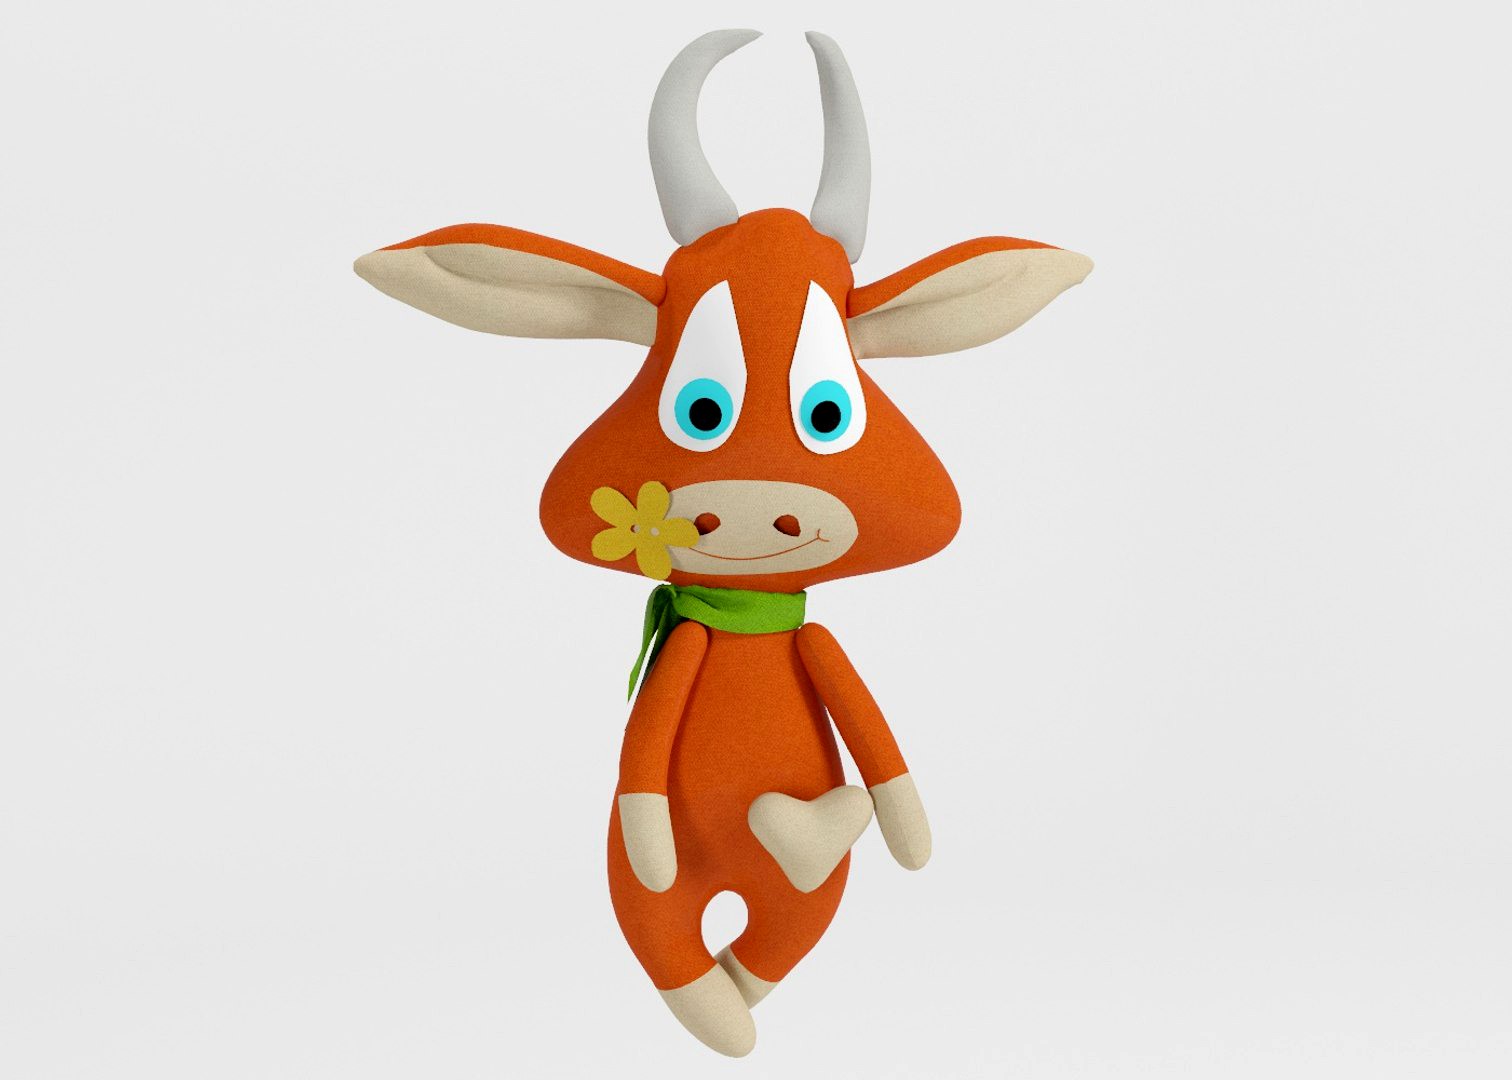 Cow toy